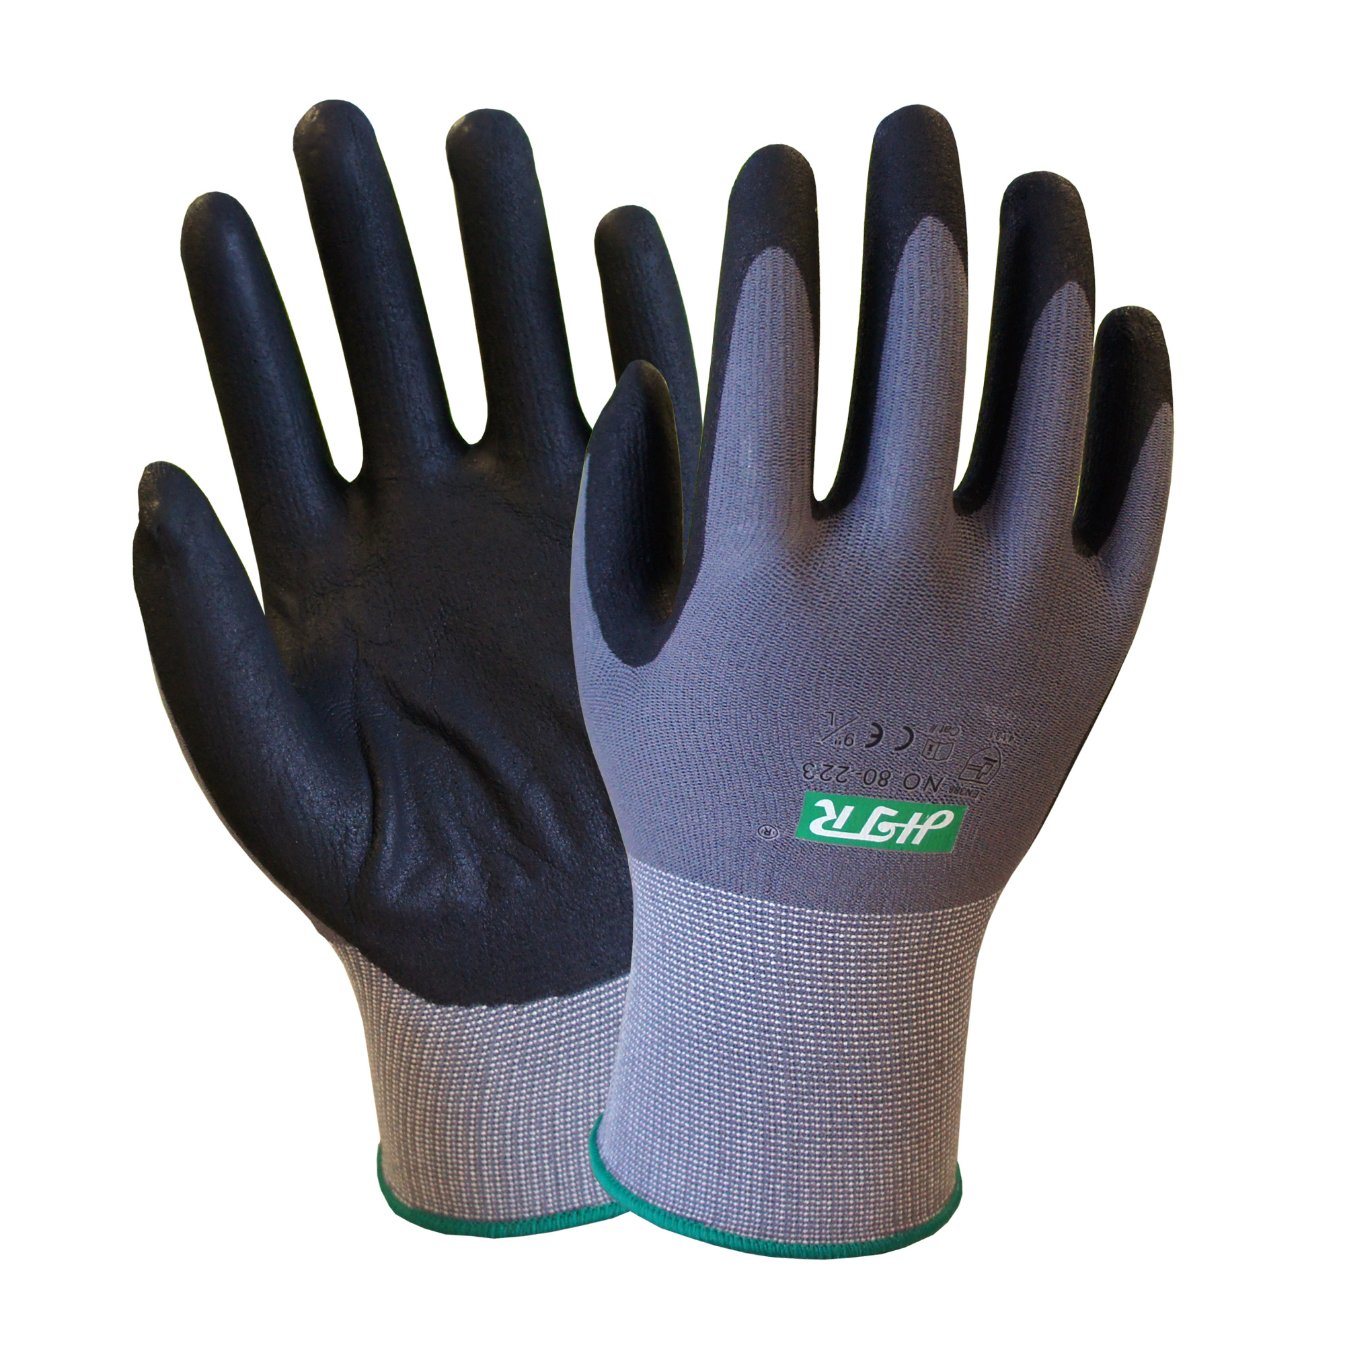 Nitrile Coated Oil-Proof Anti-Abrasion Knitted Safety Work Gloves